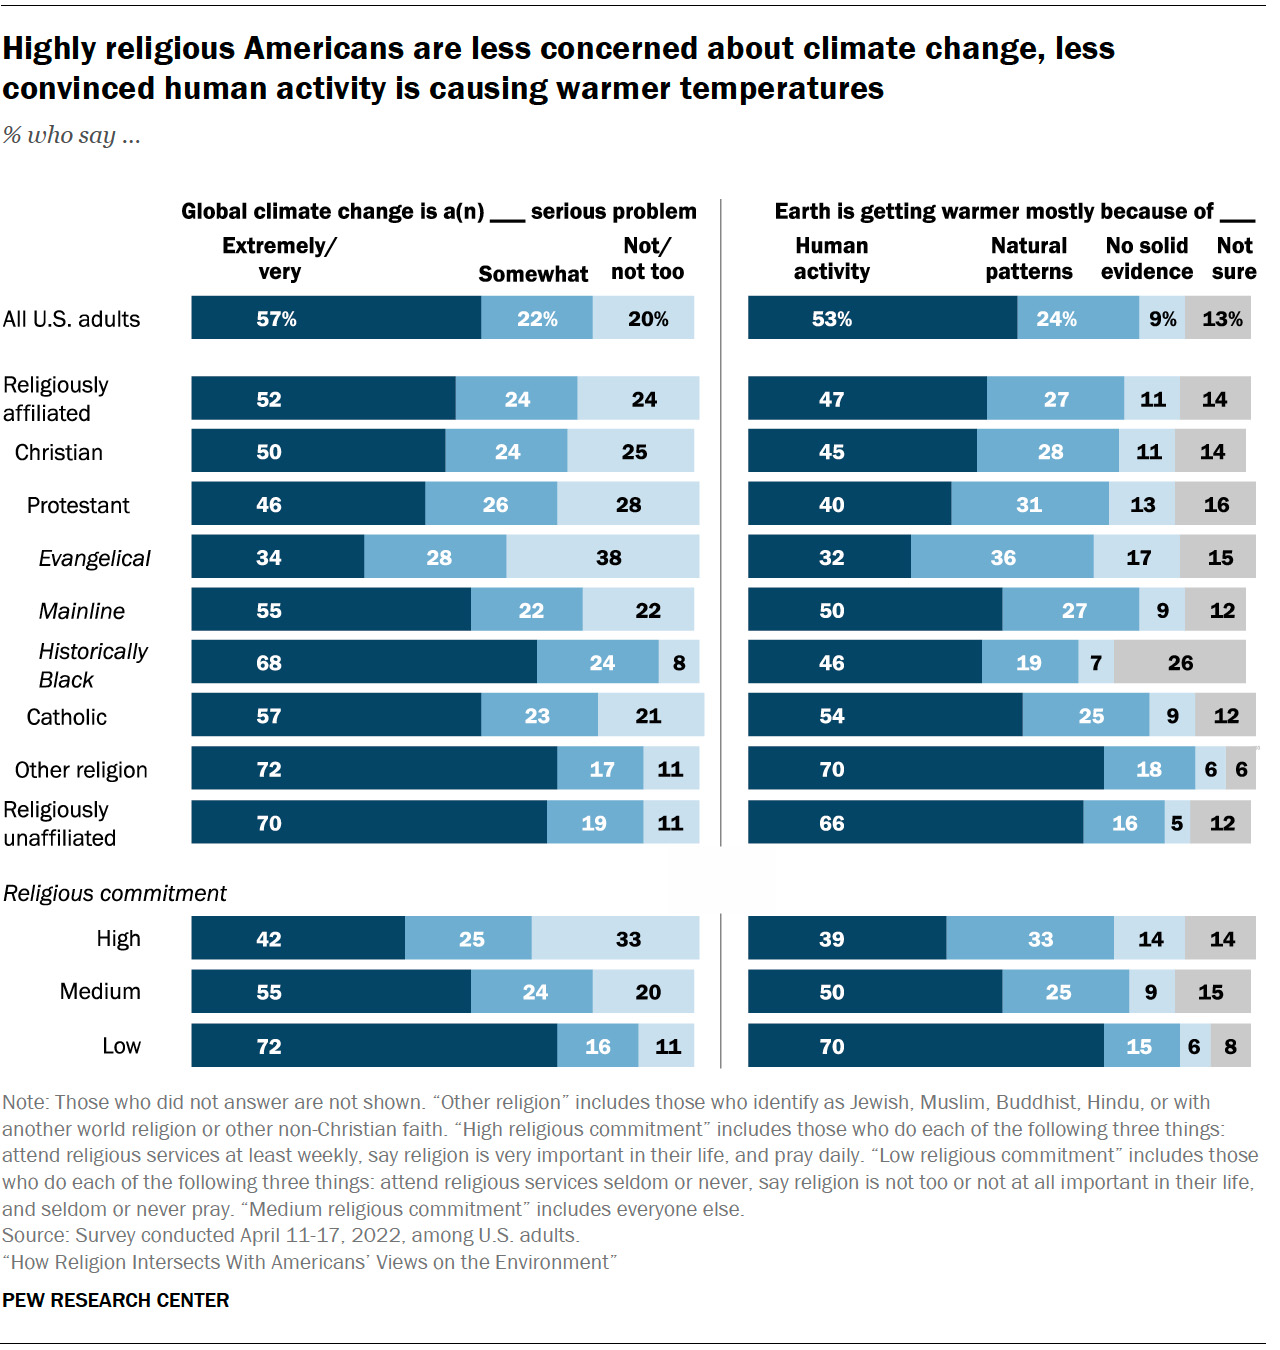 "Highly religious Americans are less concerned about climate change, less convinced human activity is causing warmer temperatures" Graphic courtesy of Pew Research Center